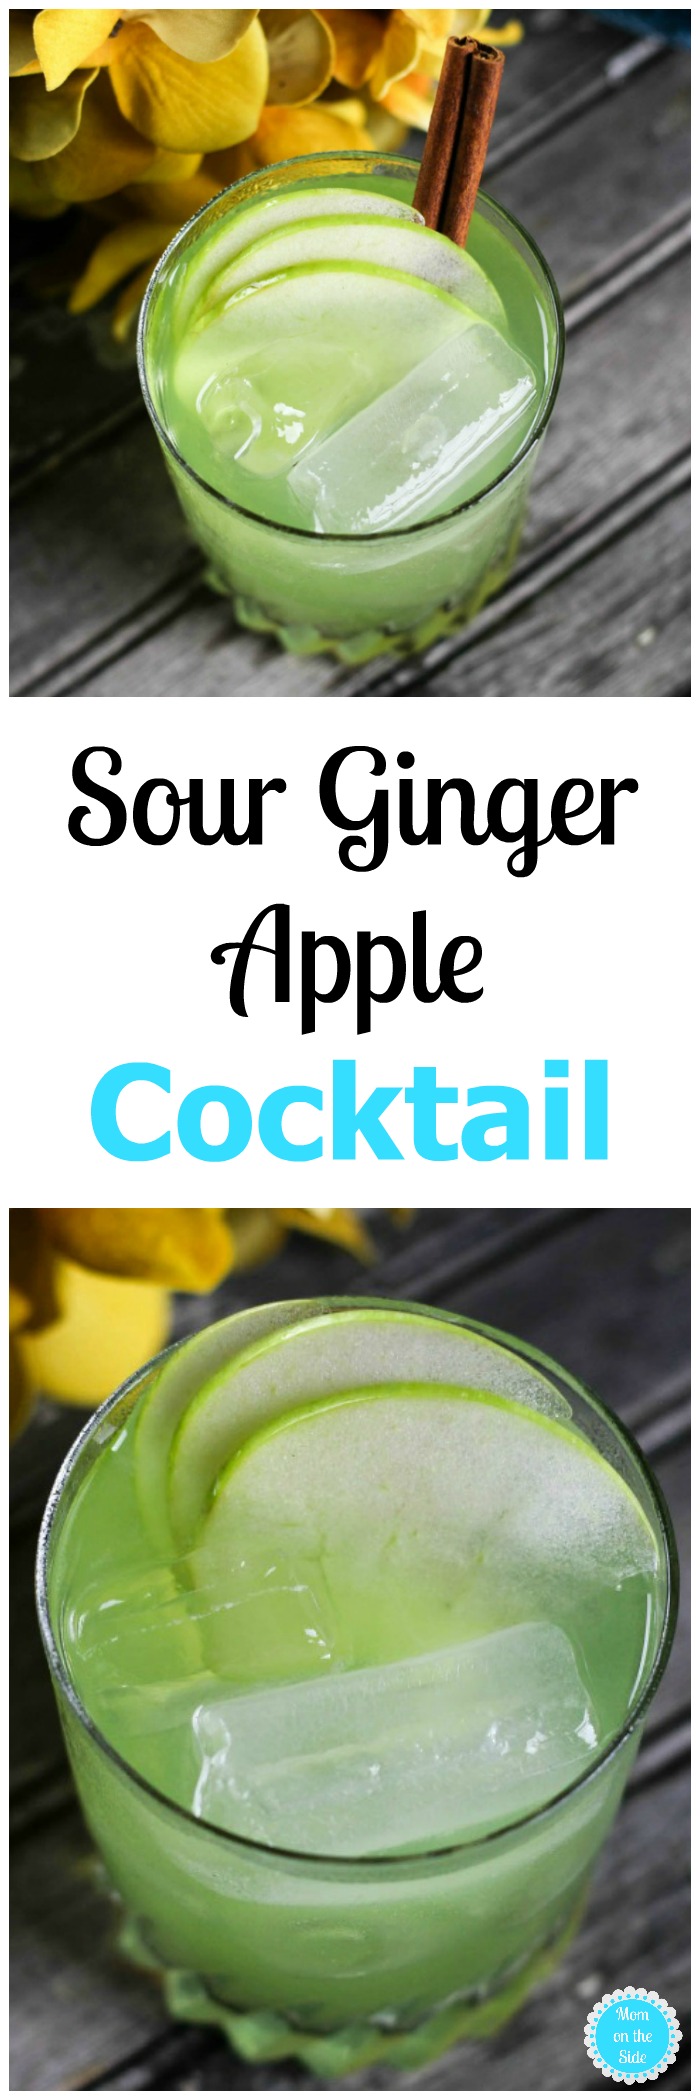 Sour Ginger Apple Cocktail Recipe